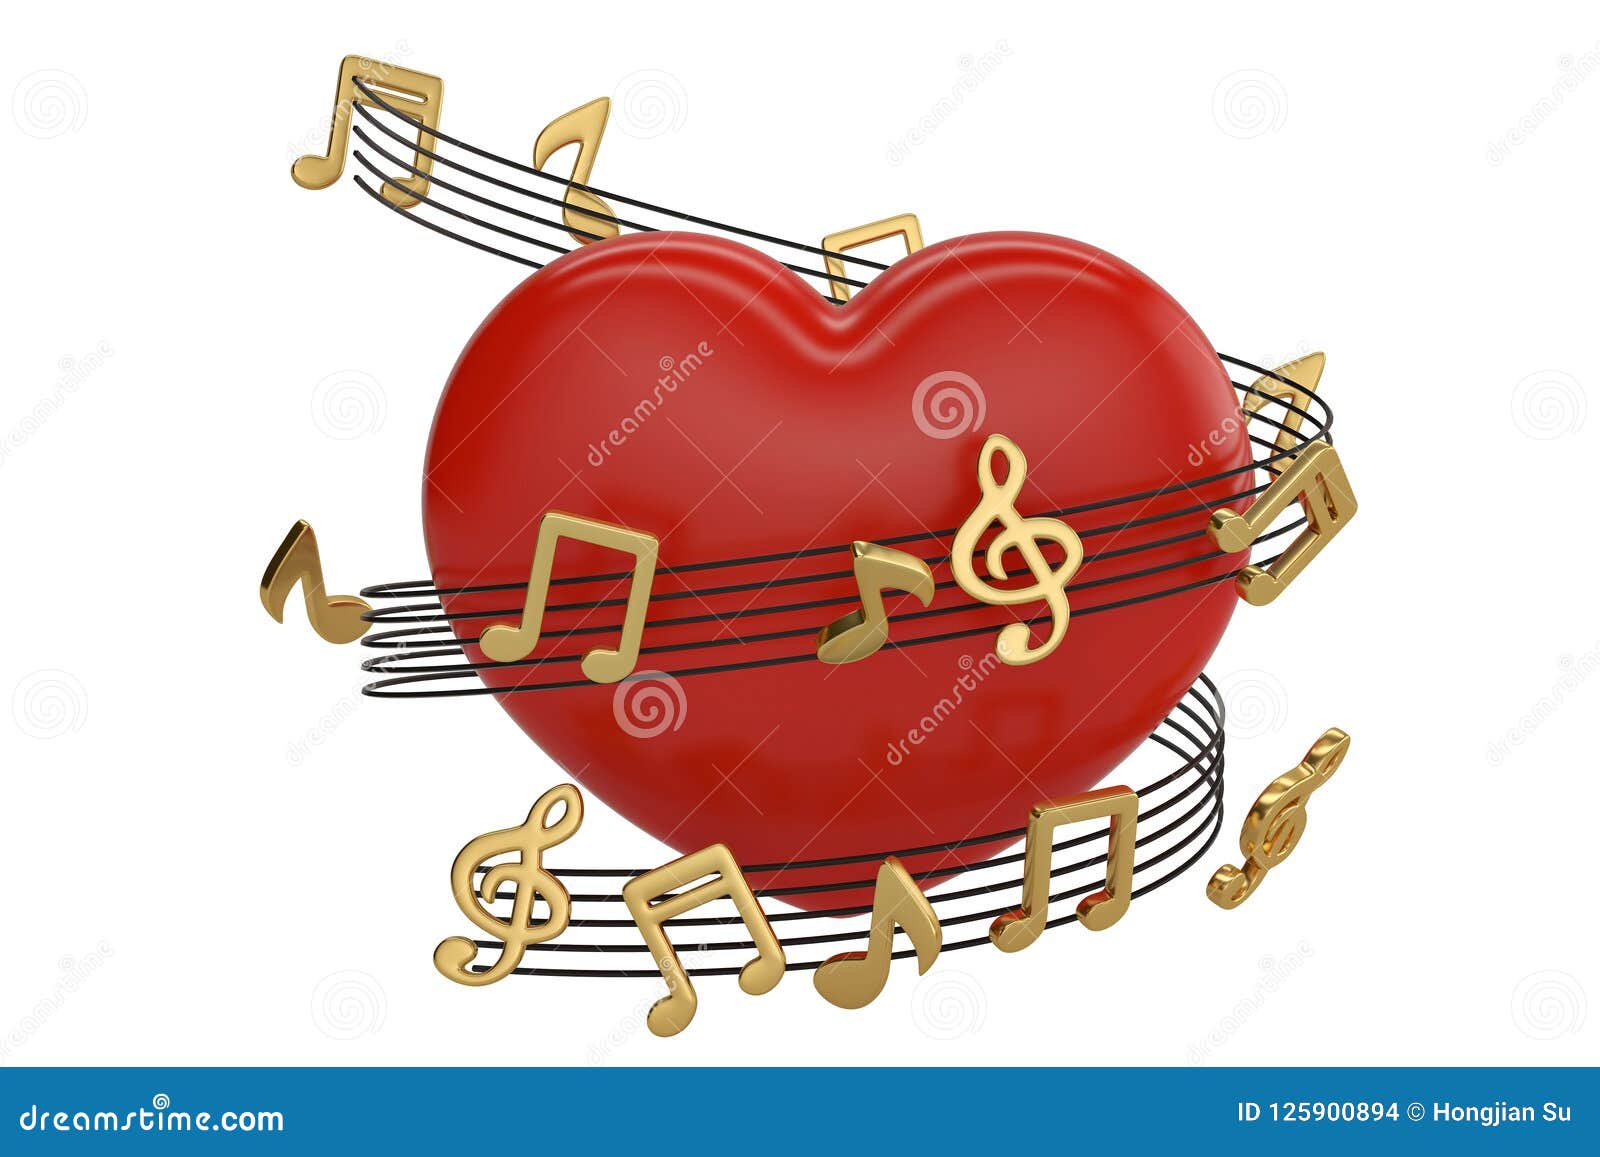 Heart Music Notes Red Stock Illustrations 518 Heart Music Notes Red Stock Illustrations Vectors Clipart Dreamstime